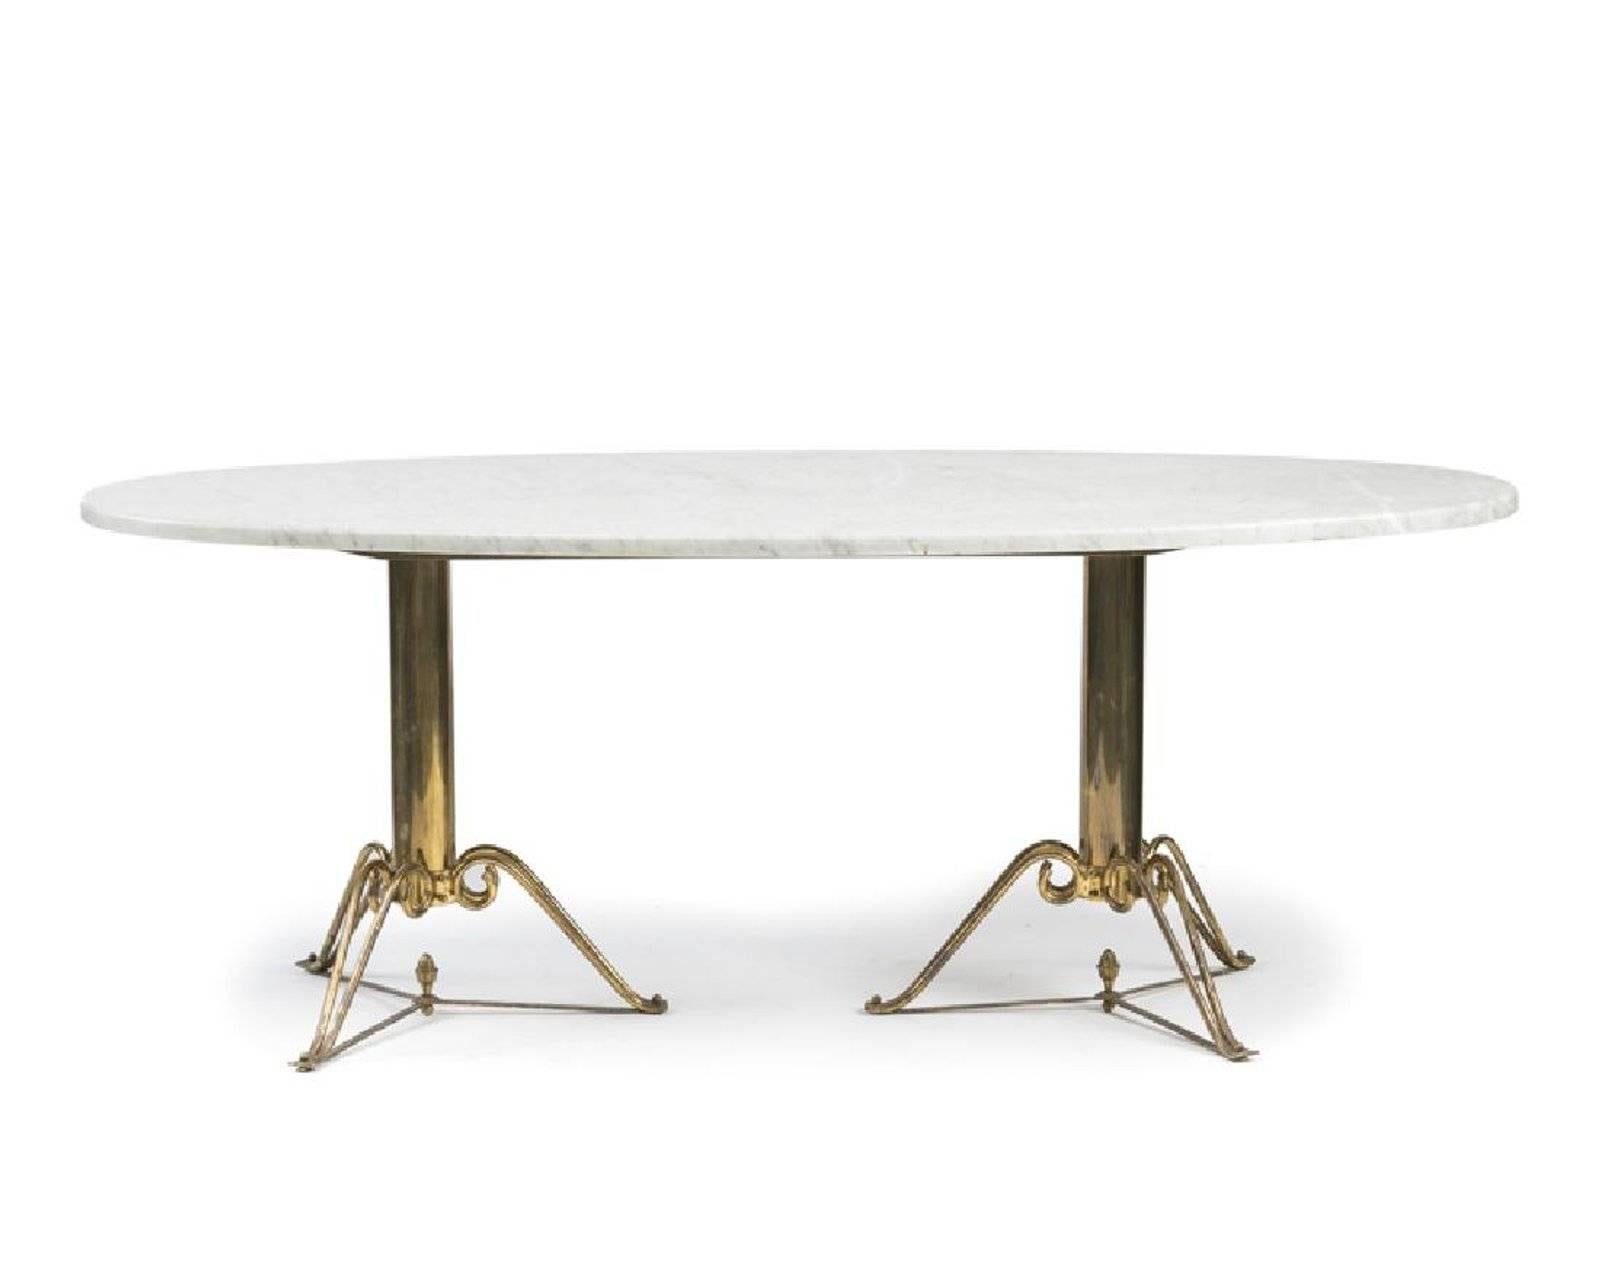 The oval white marble-top raised on two brass tripodal pedestal bases, circa 1970s
Measures: 29.75